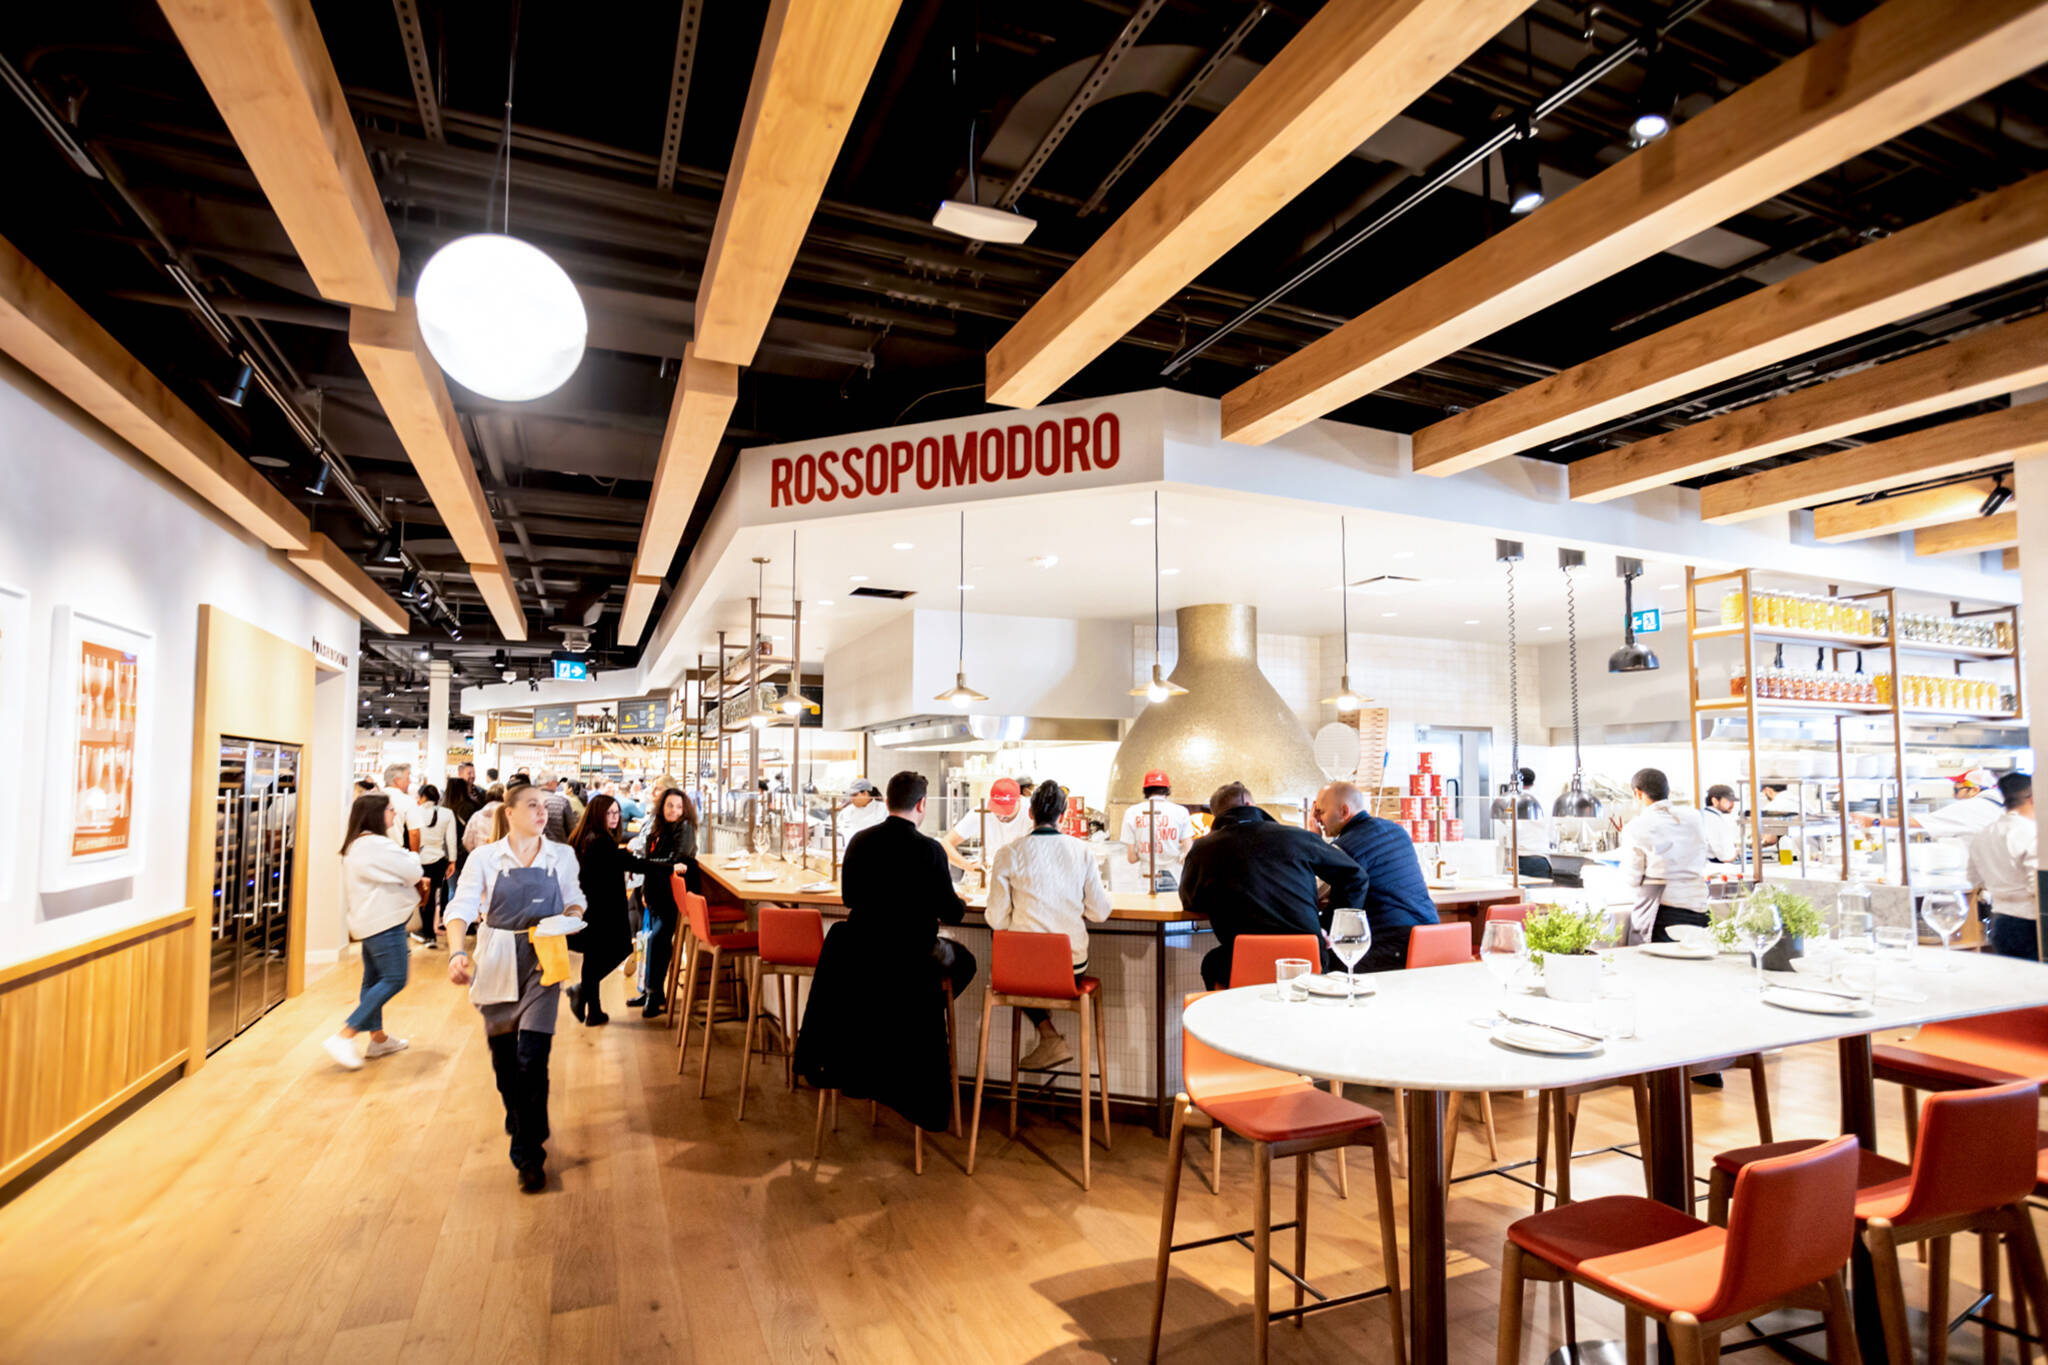 https://media.blogto.com/listings/20231103-Eataly-50.jpg?w=2048&cmd=resize_then_crop&height=1365&quality=70